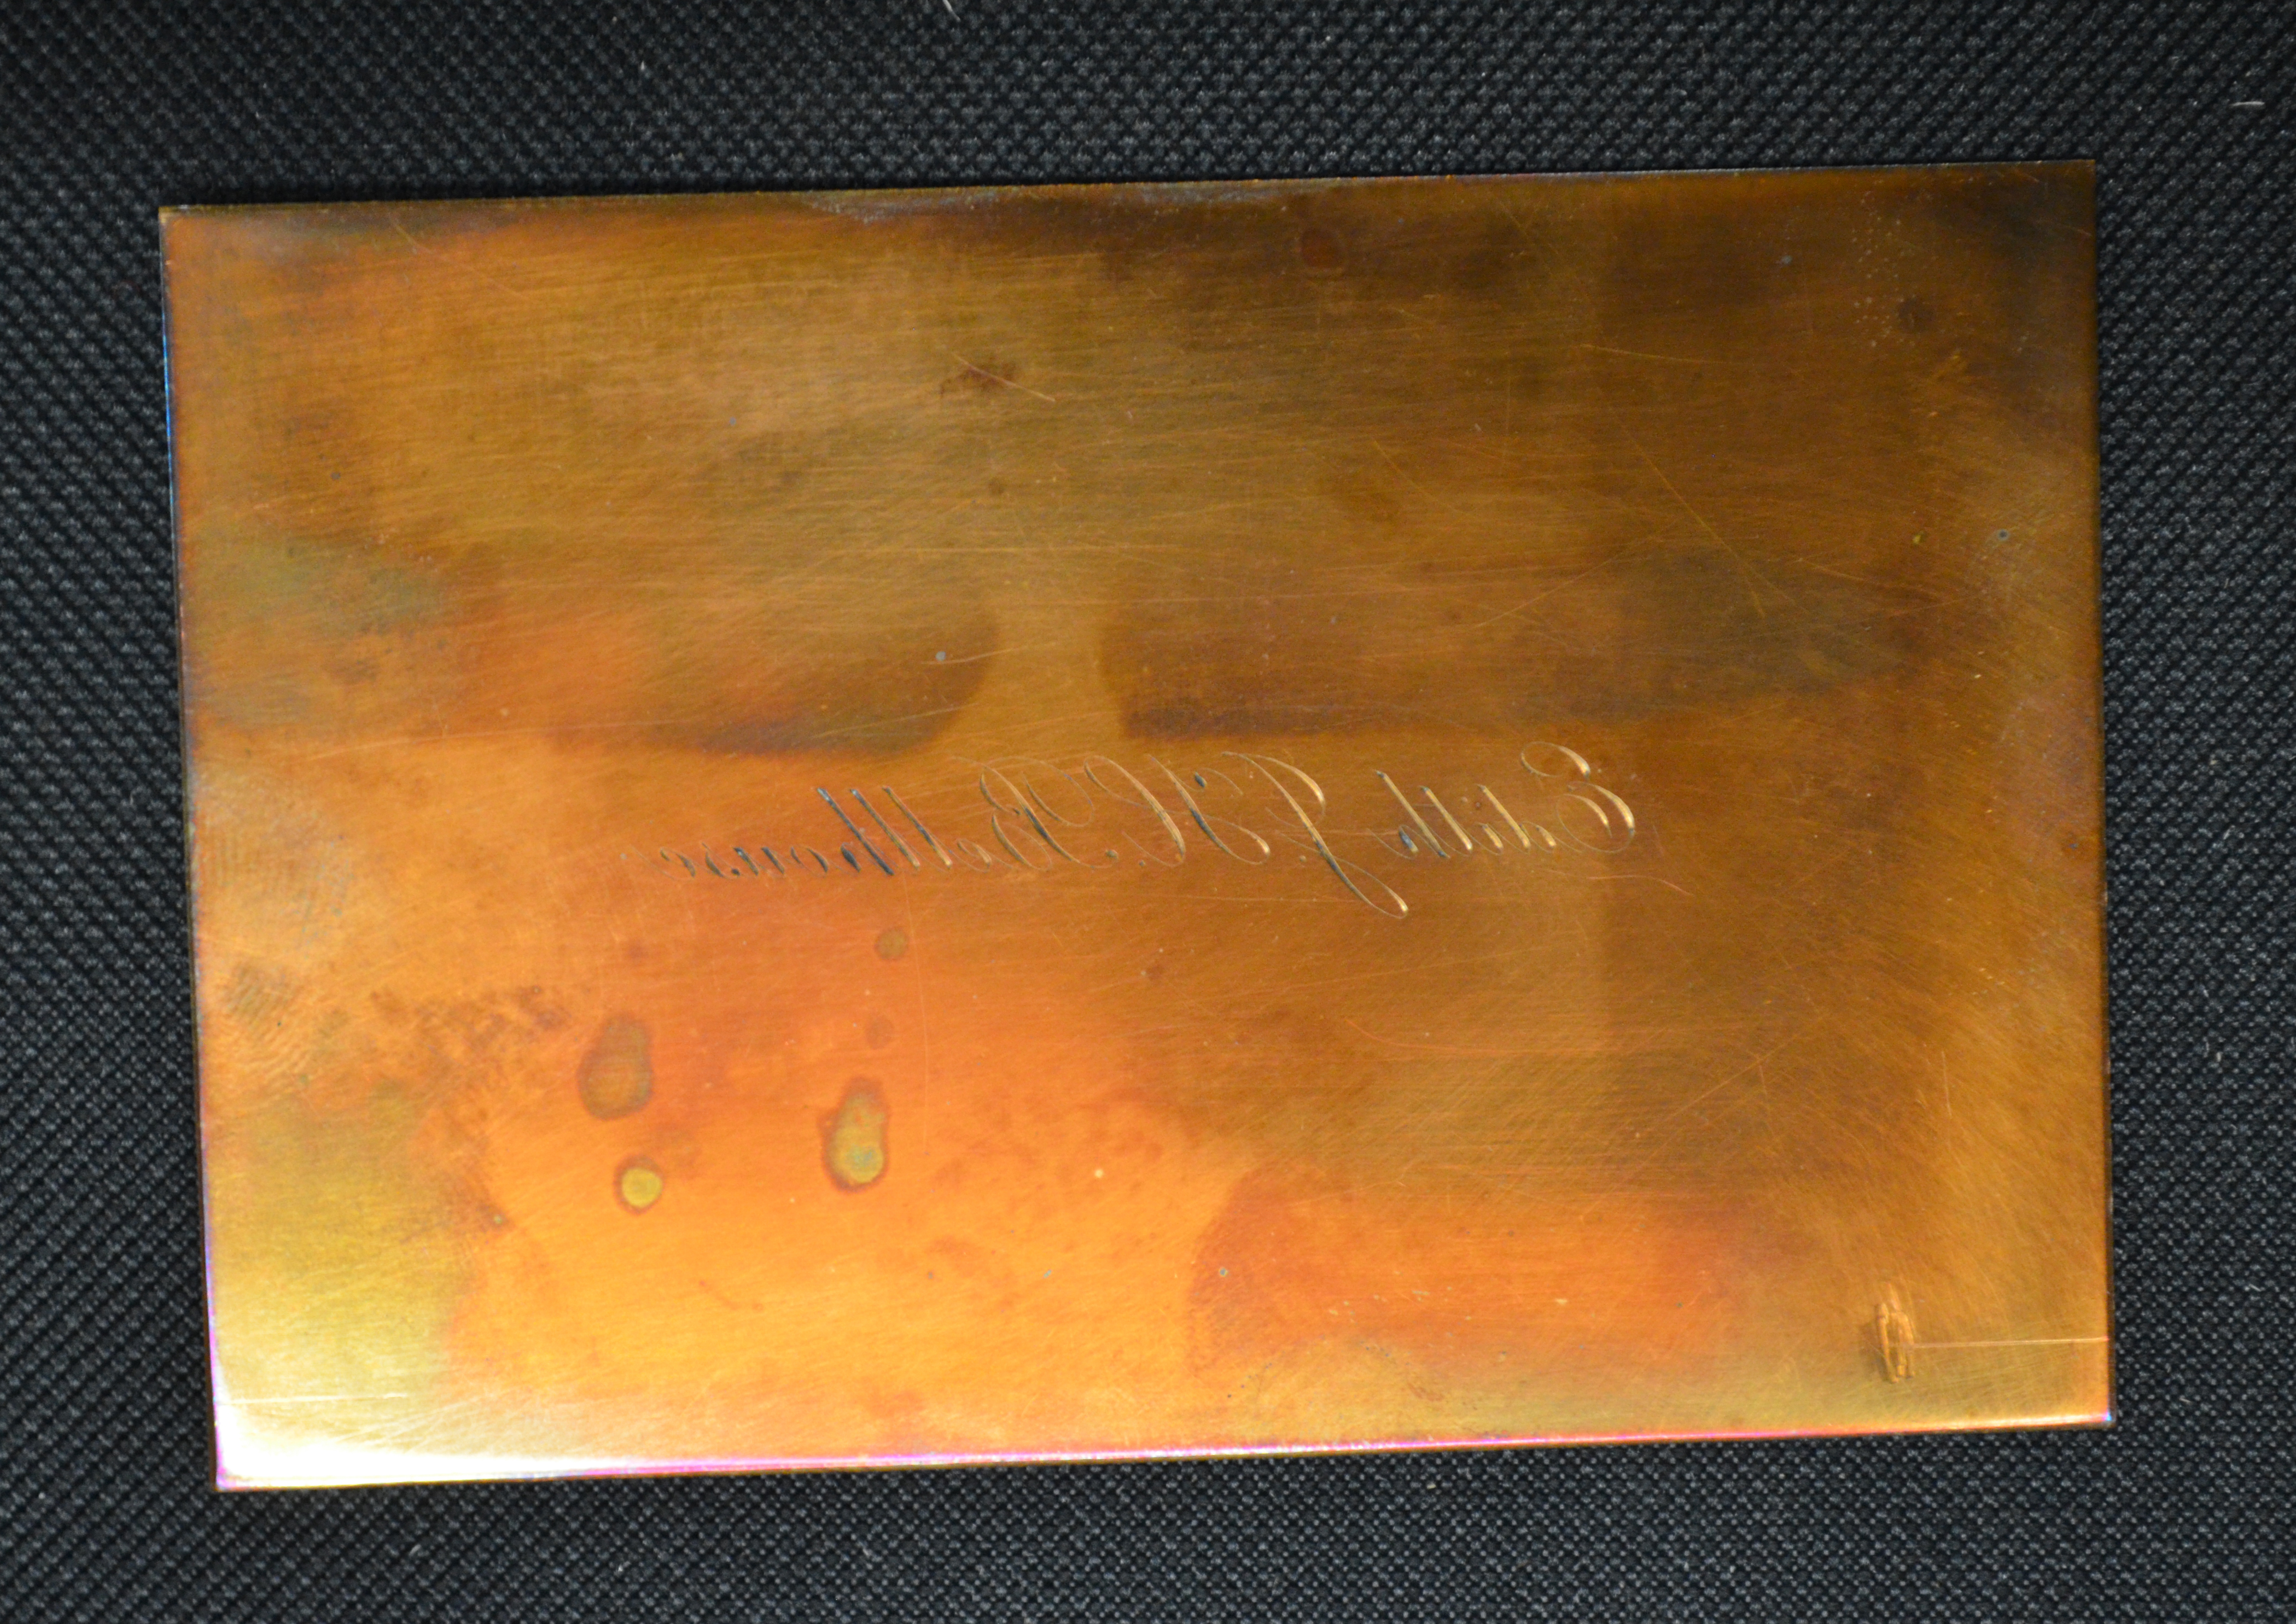 colour%20photo%20showing%20a%20copper%20engraving%20plate